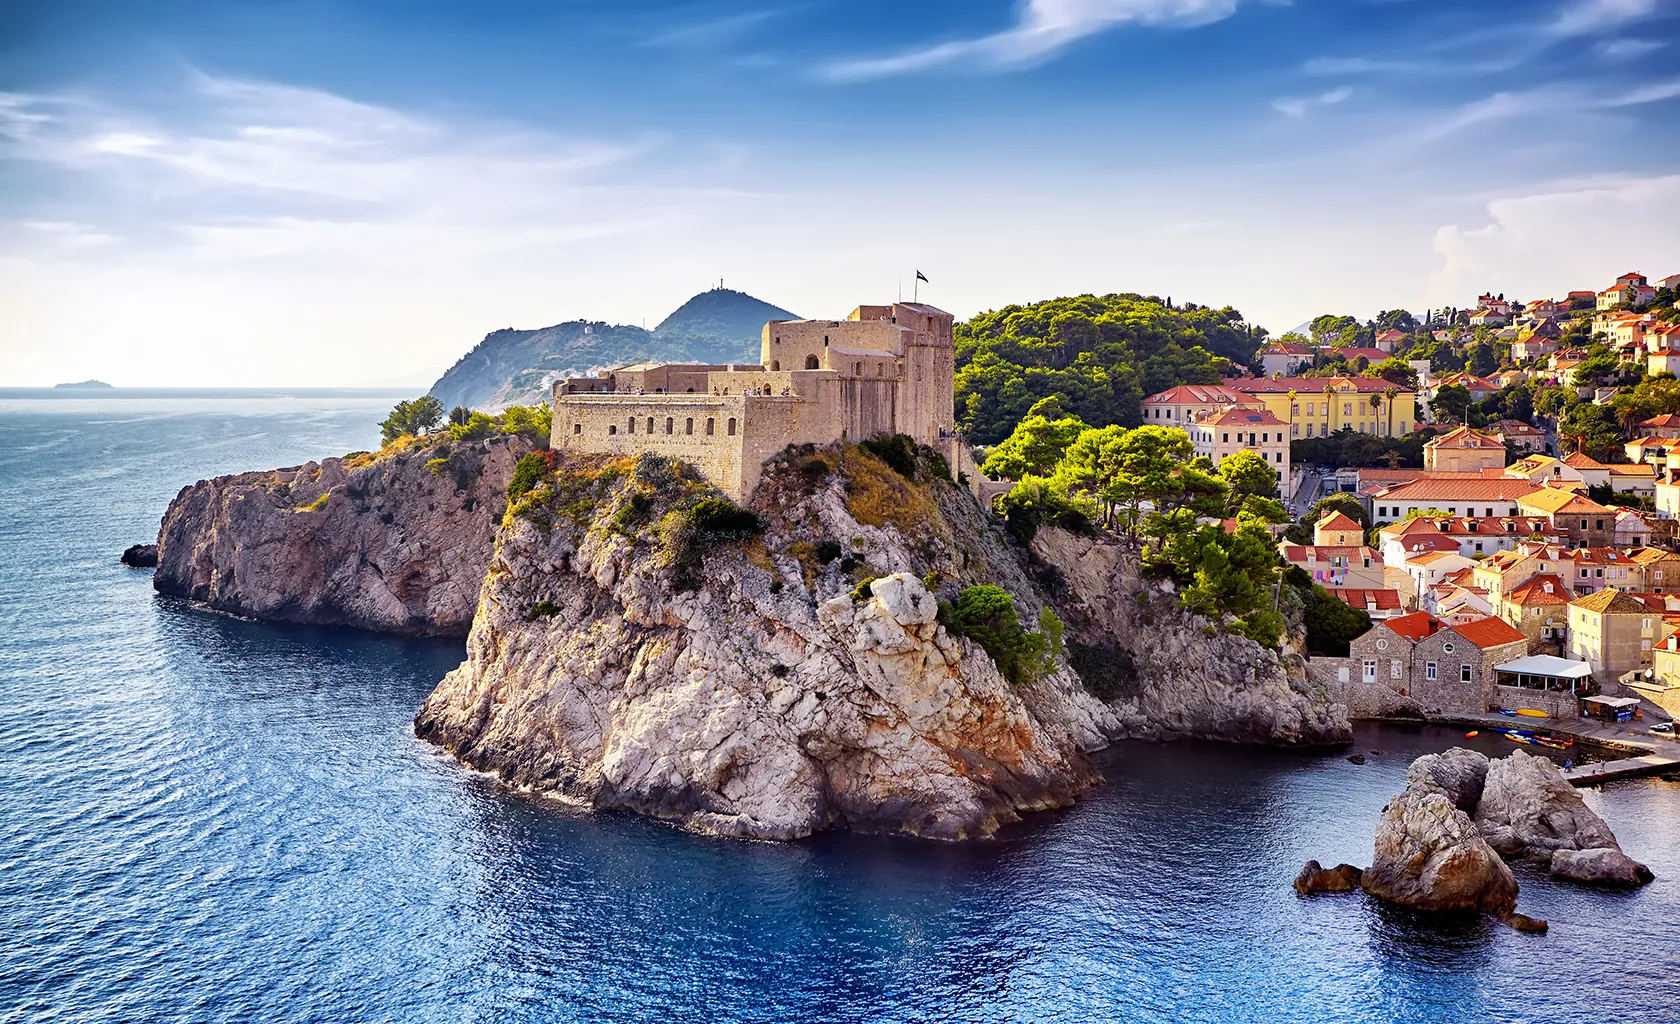 Explore Dubrovnik on board a yacht